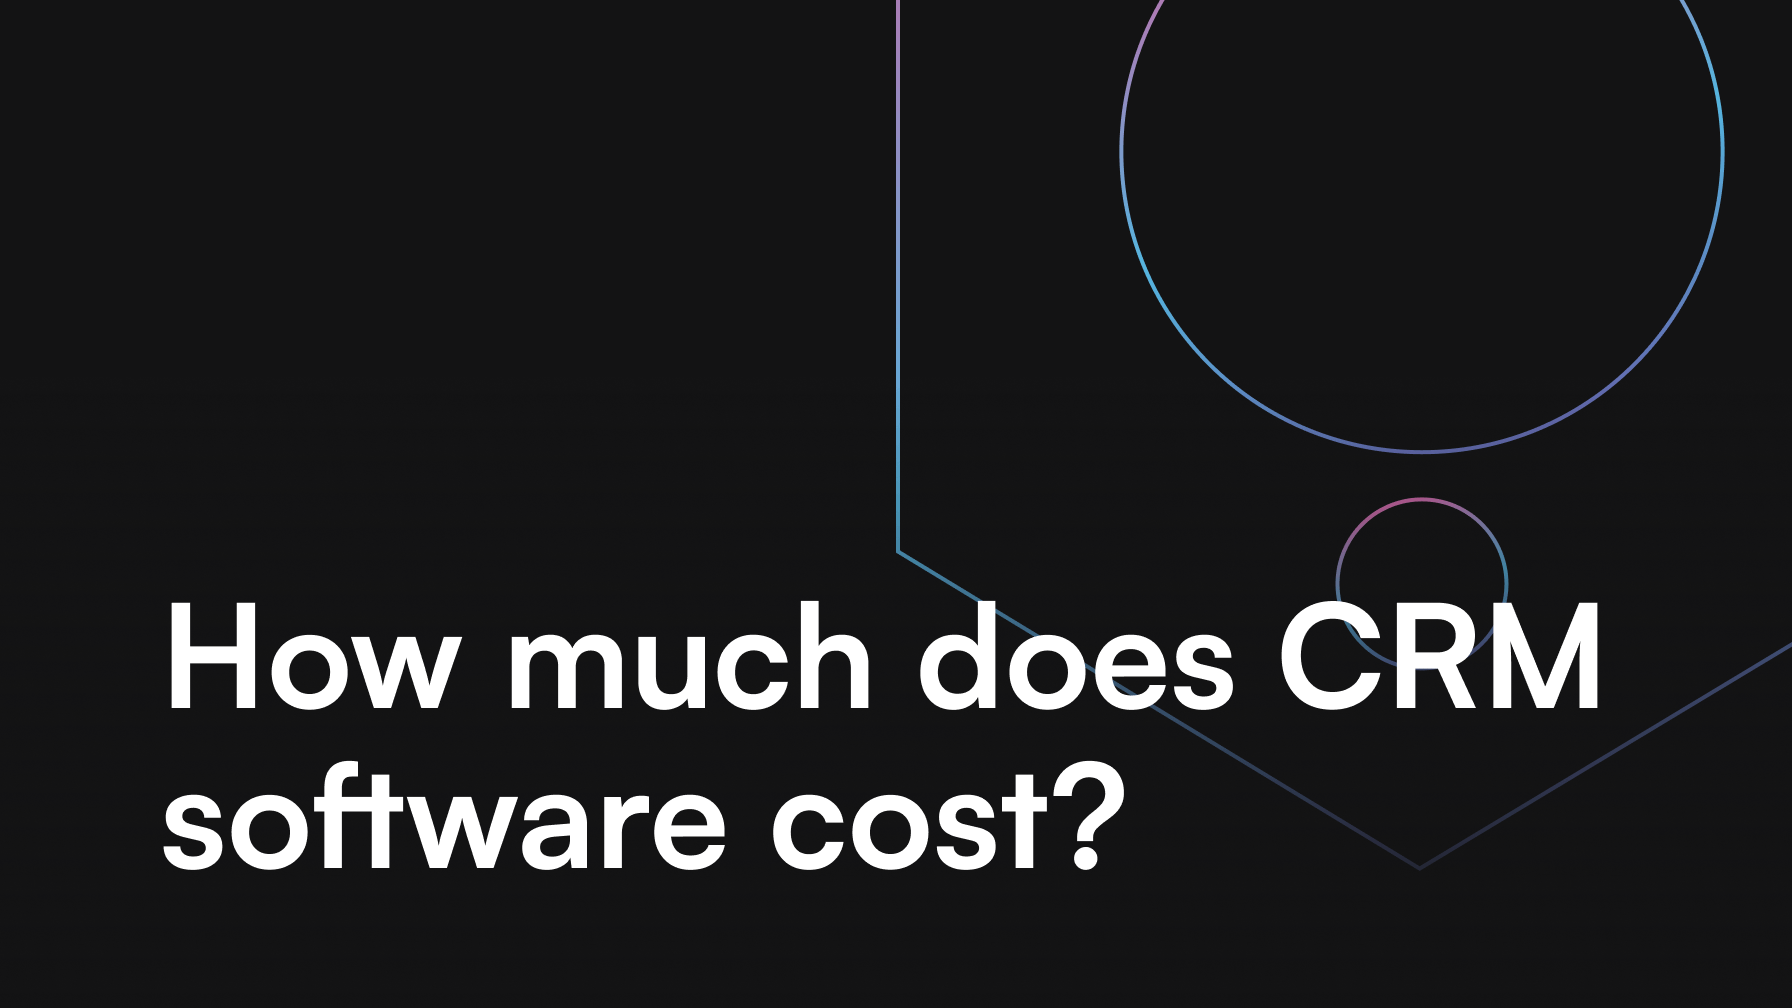 How much does custom CRM software cost?